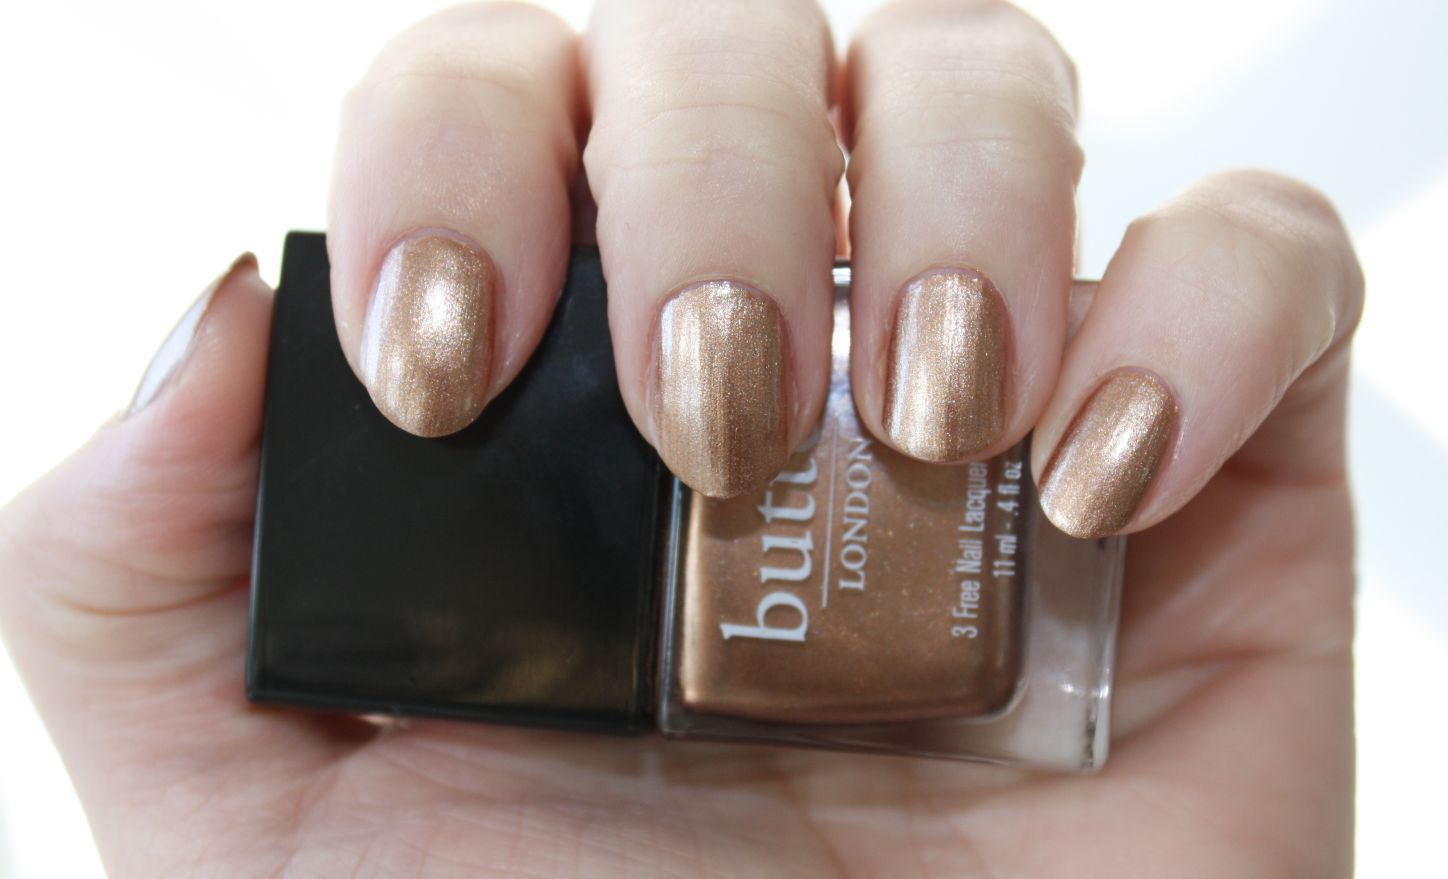 4. "Gingerbread Mani" Nail Polish Set by Butter London - wide 7